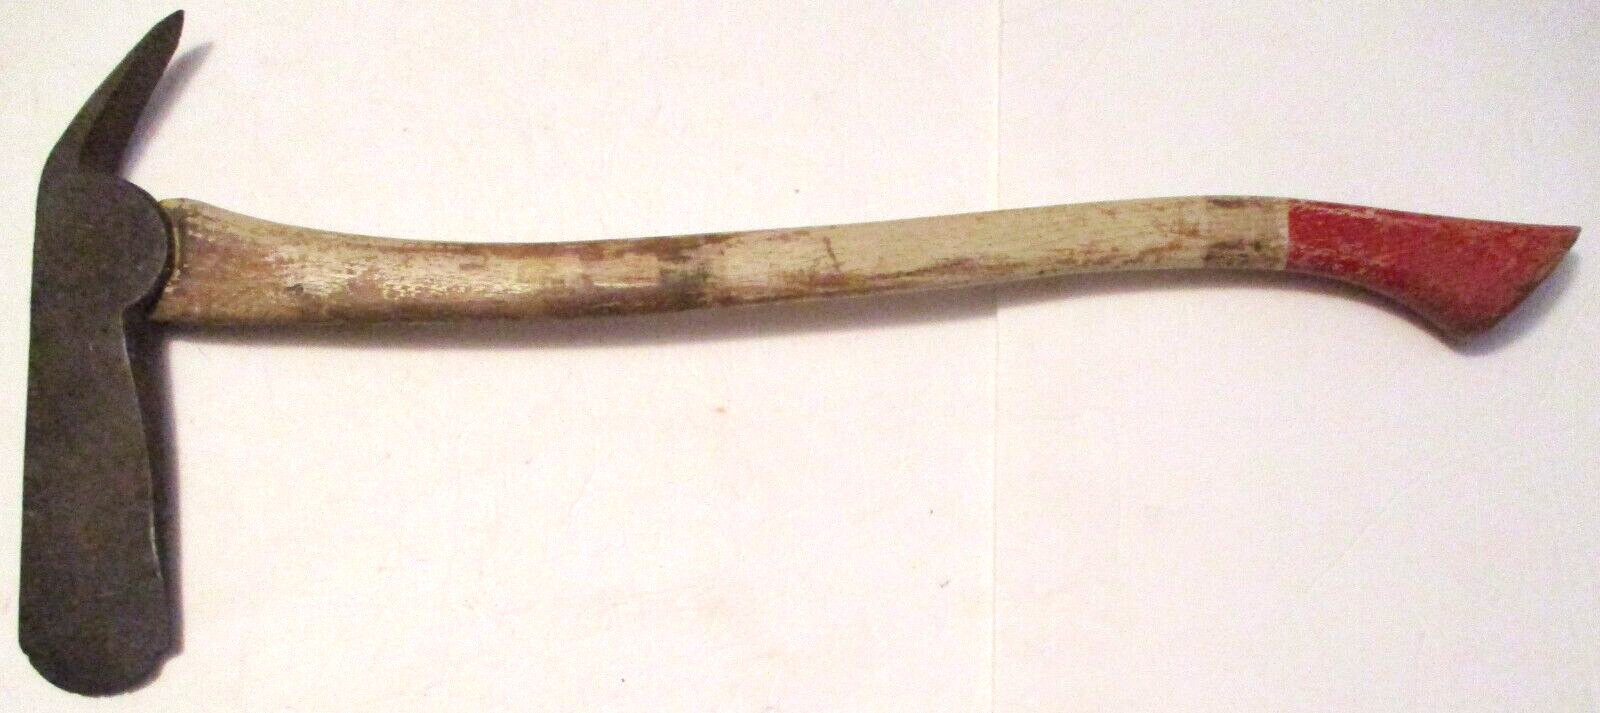 RARE ANTIQUE VINTAGE ICE AXE AX ~ FOUND IN BASEMENT of AN OLD CLOSED DOWN TAVERN